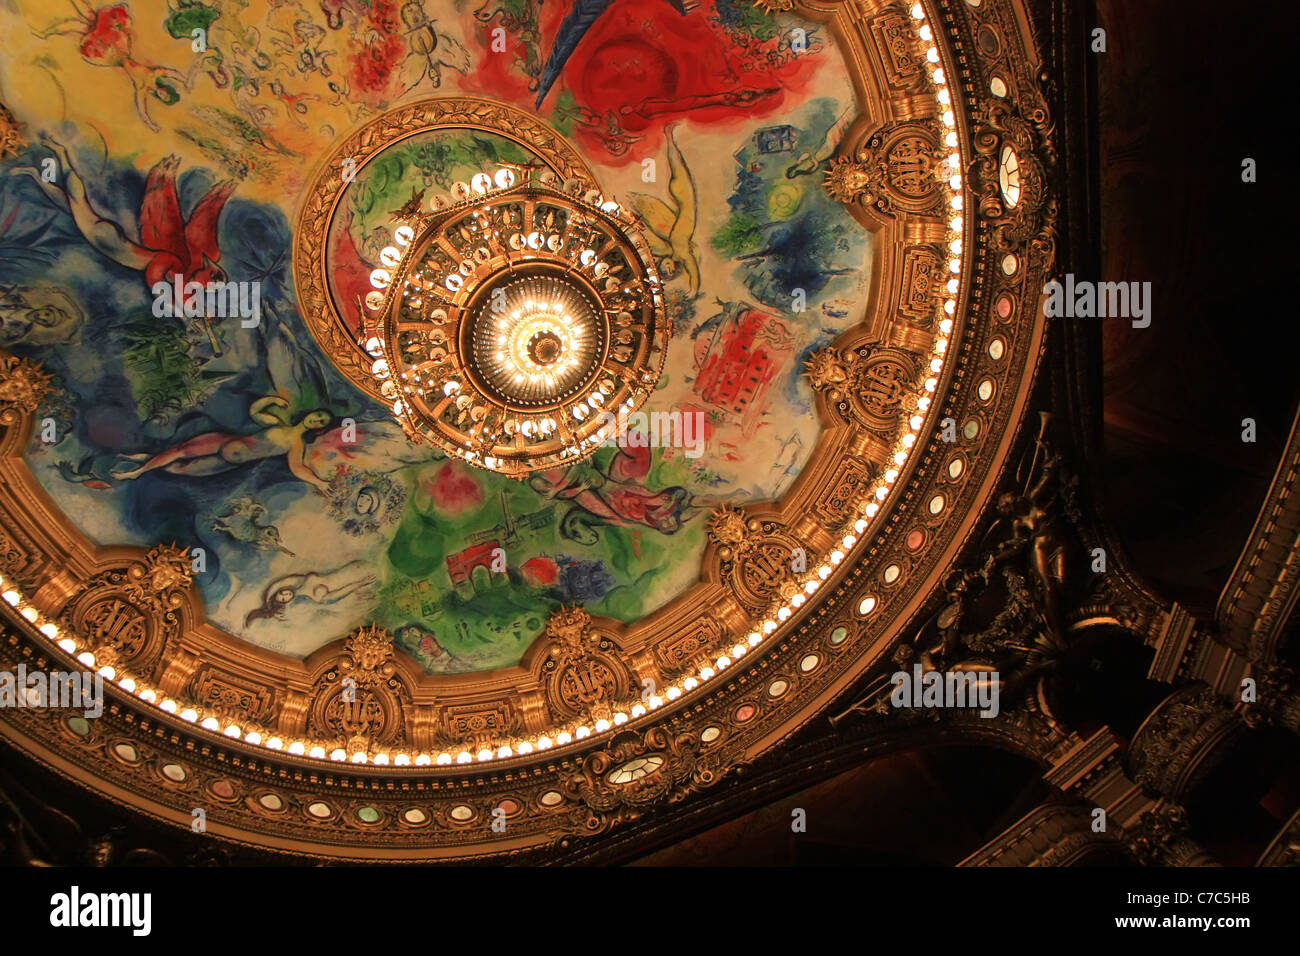 Magnificent chandelier and painted ceiling of the auditorium of opera Garnier, Paris, France Stock Photo